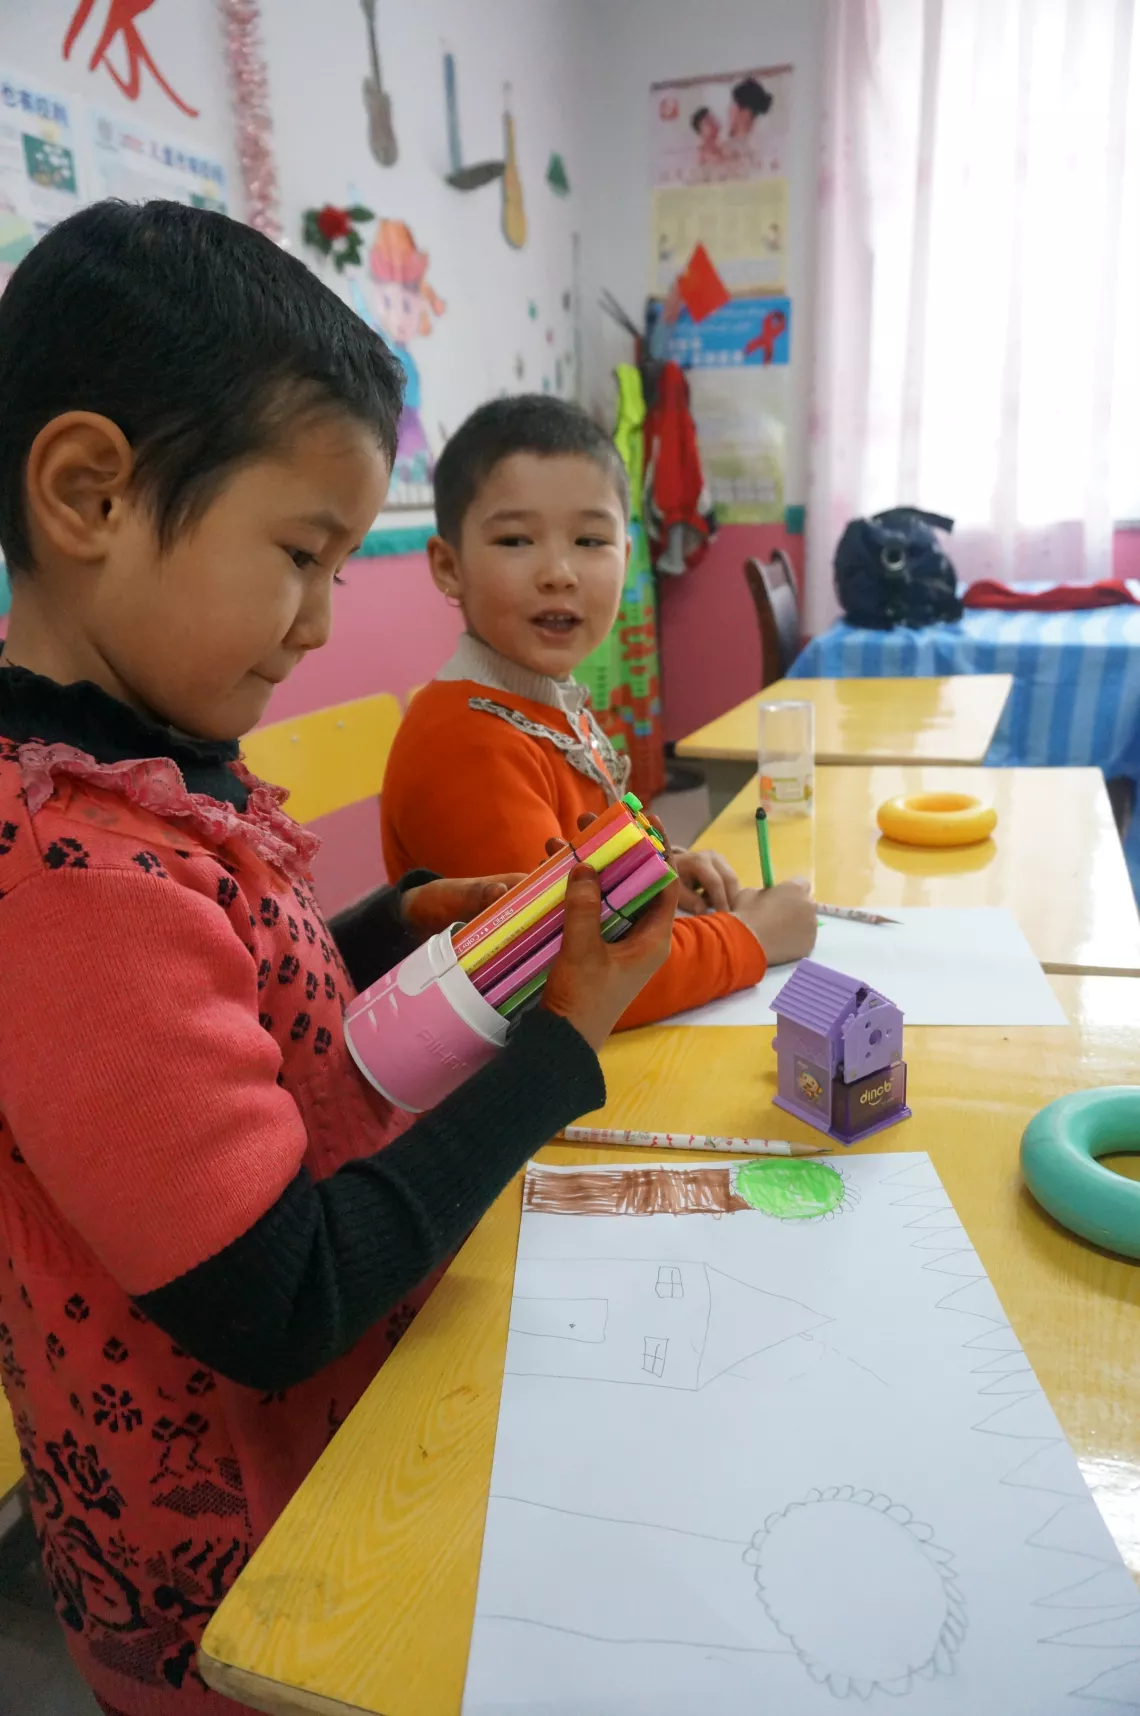 Two girls paint pictures in the children's space in Yining County, Xinjiang Uyghur Autonomous Region.